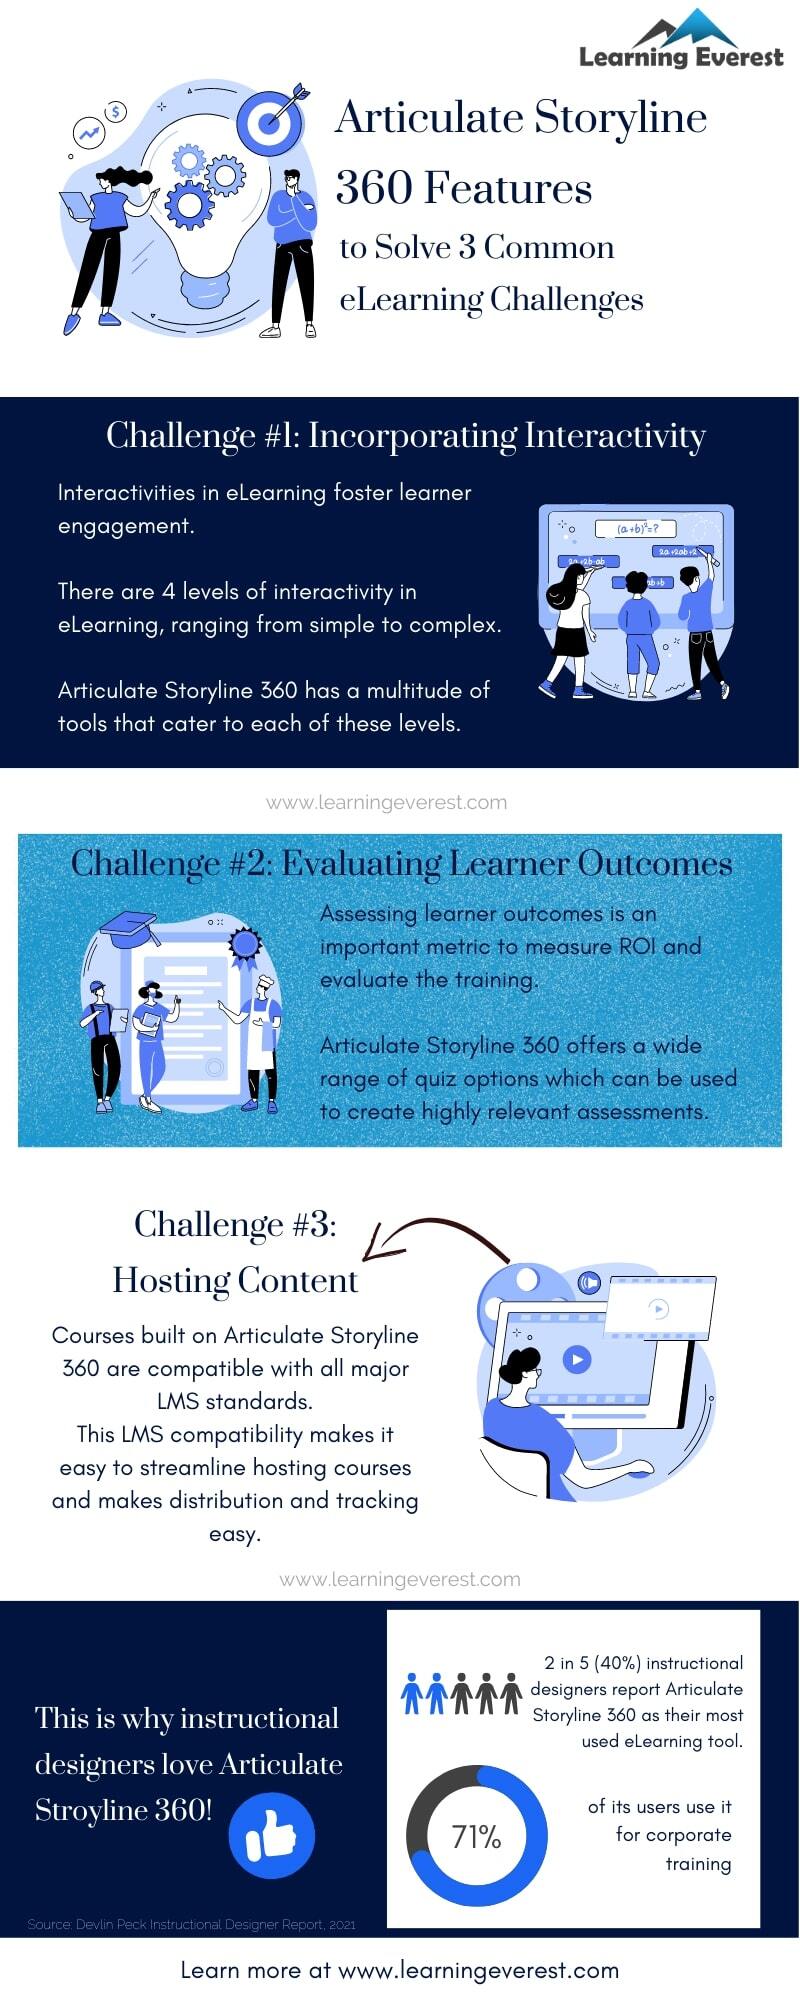 Articulate Storyline 360 Features to Solve 3 Common eLearning Challenges Infographic